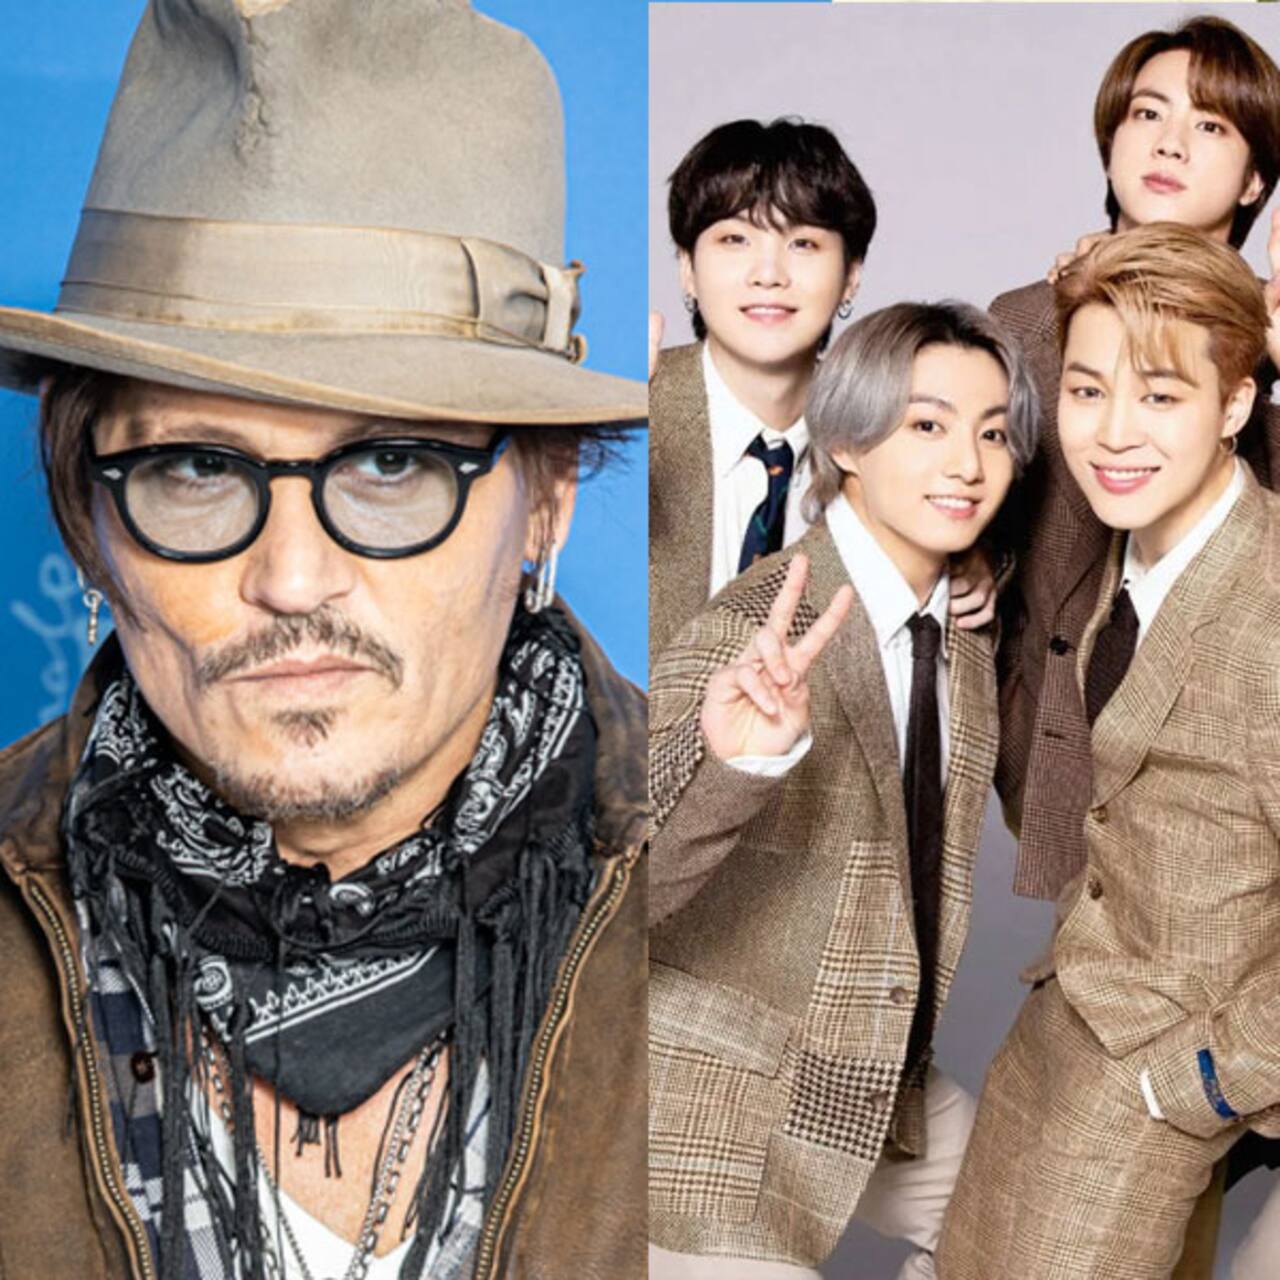 Top Hollywood News Weekly Rewind: Johnny Depp's Queensland mansion sold at whopping price, BTS to join military soon and more